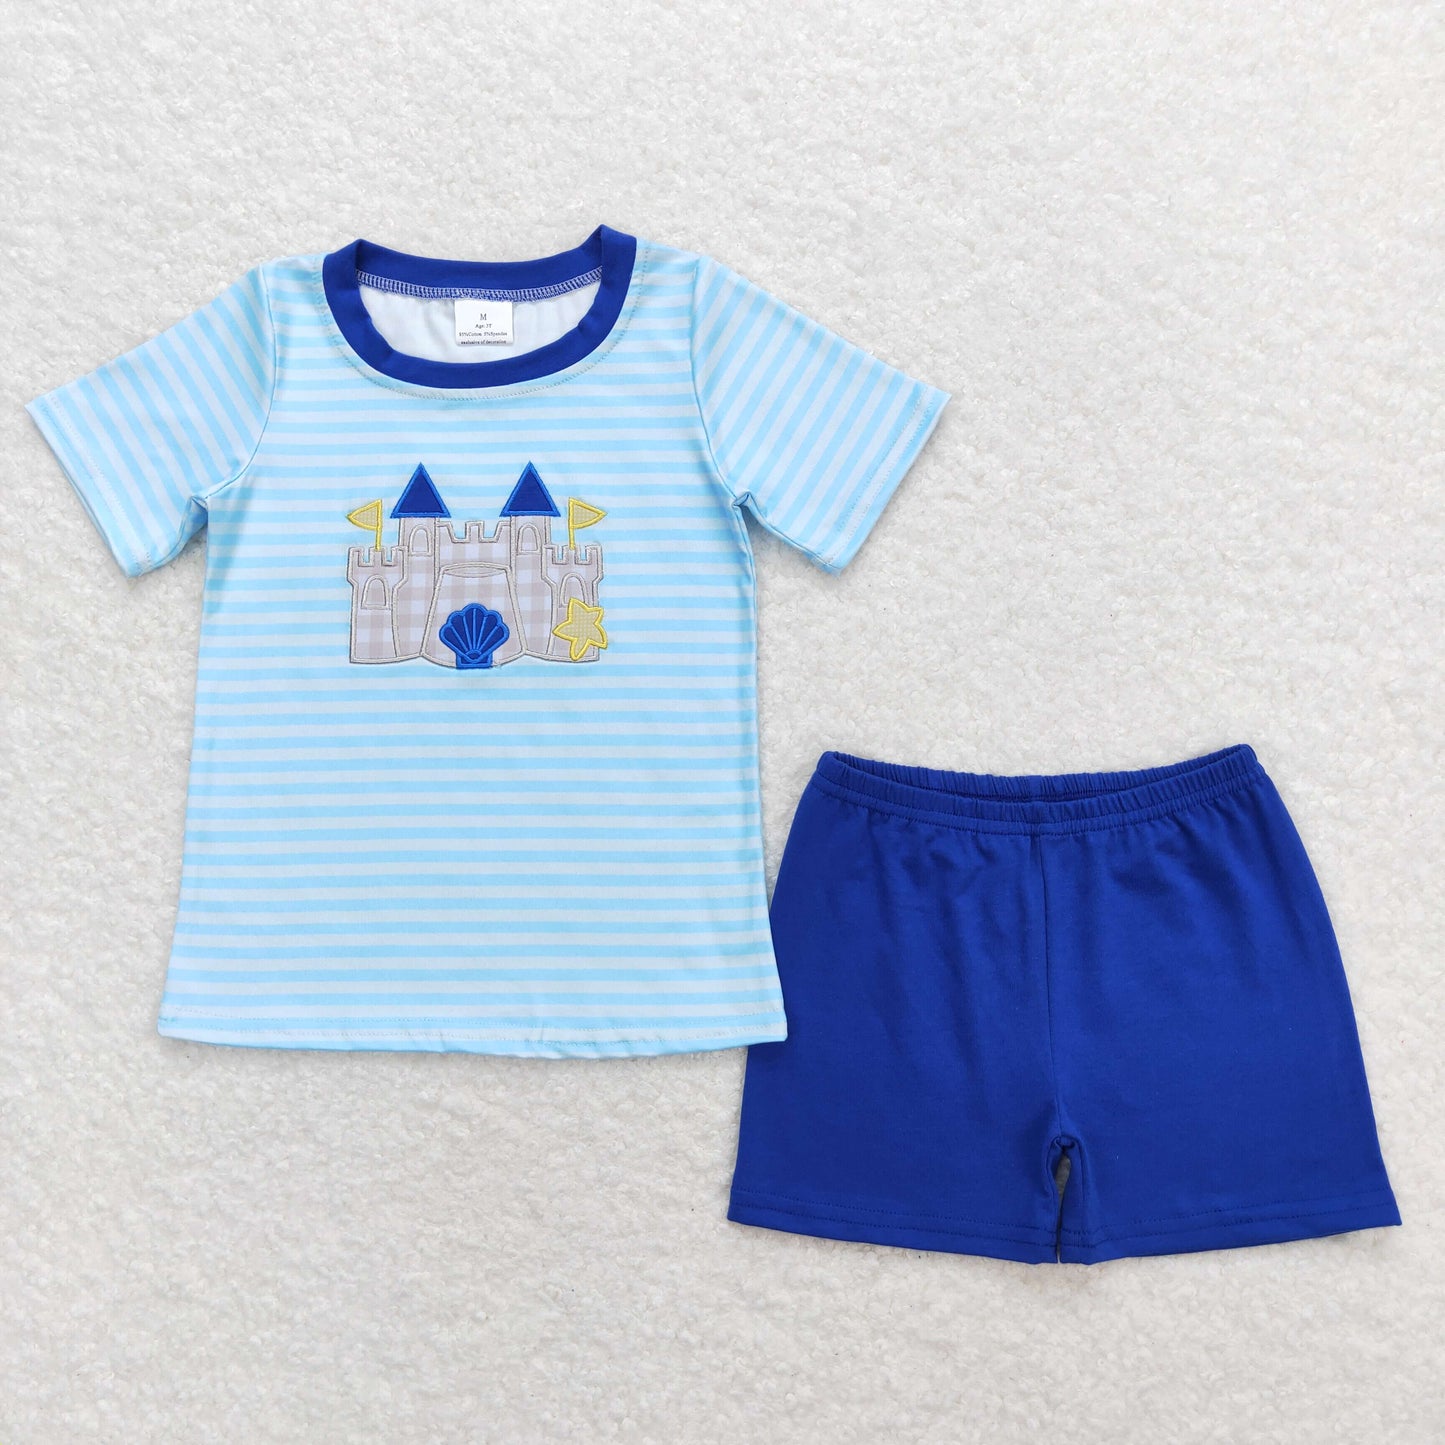 baby boy clothes beach castle embroidery shorts set